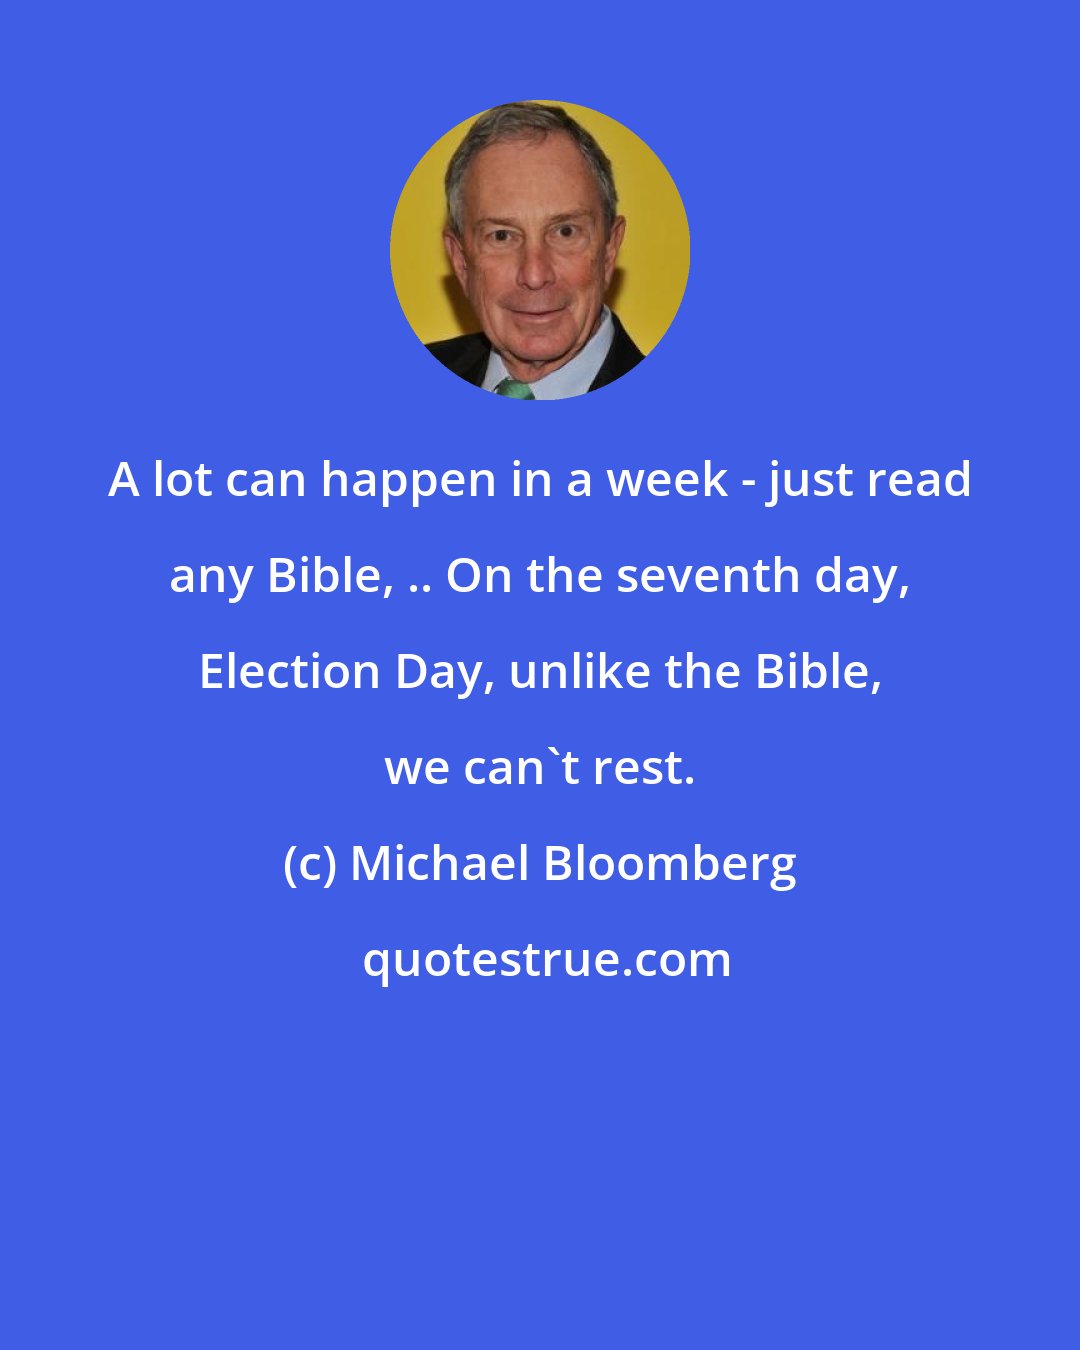 Michael Bloomberg: A lot can happen in a week - just read any Bible, .. On the seventh day, Election Day, unlike the Bible, we can't rest.